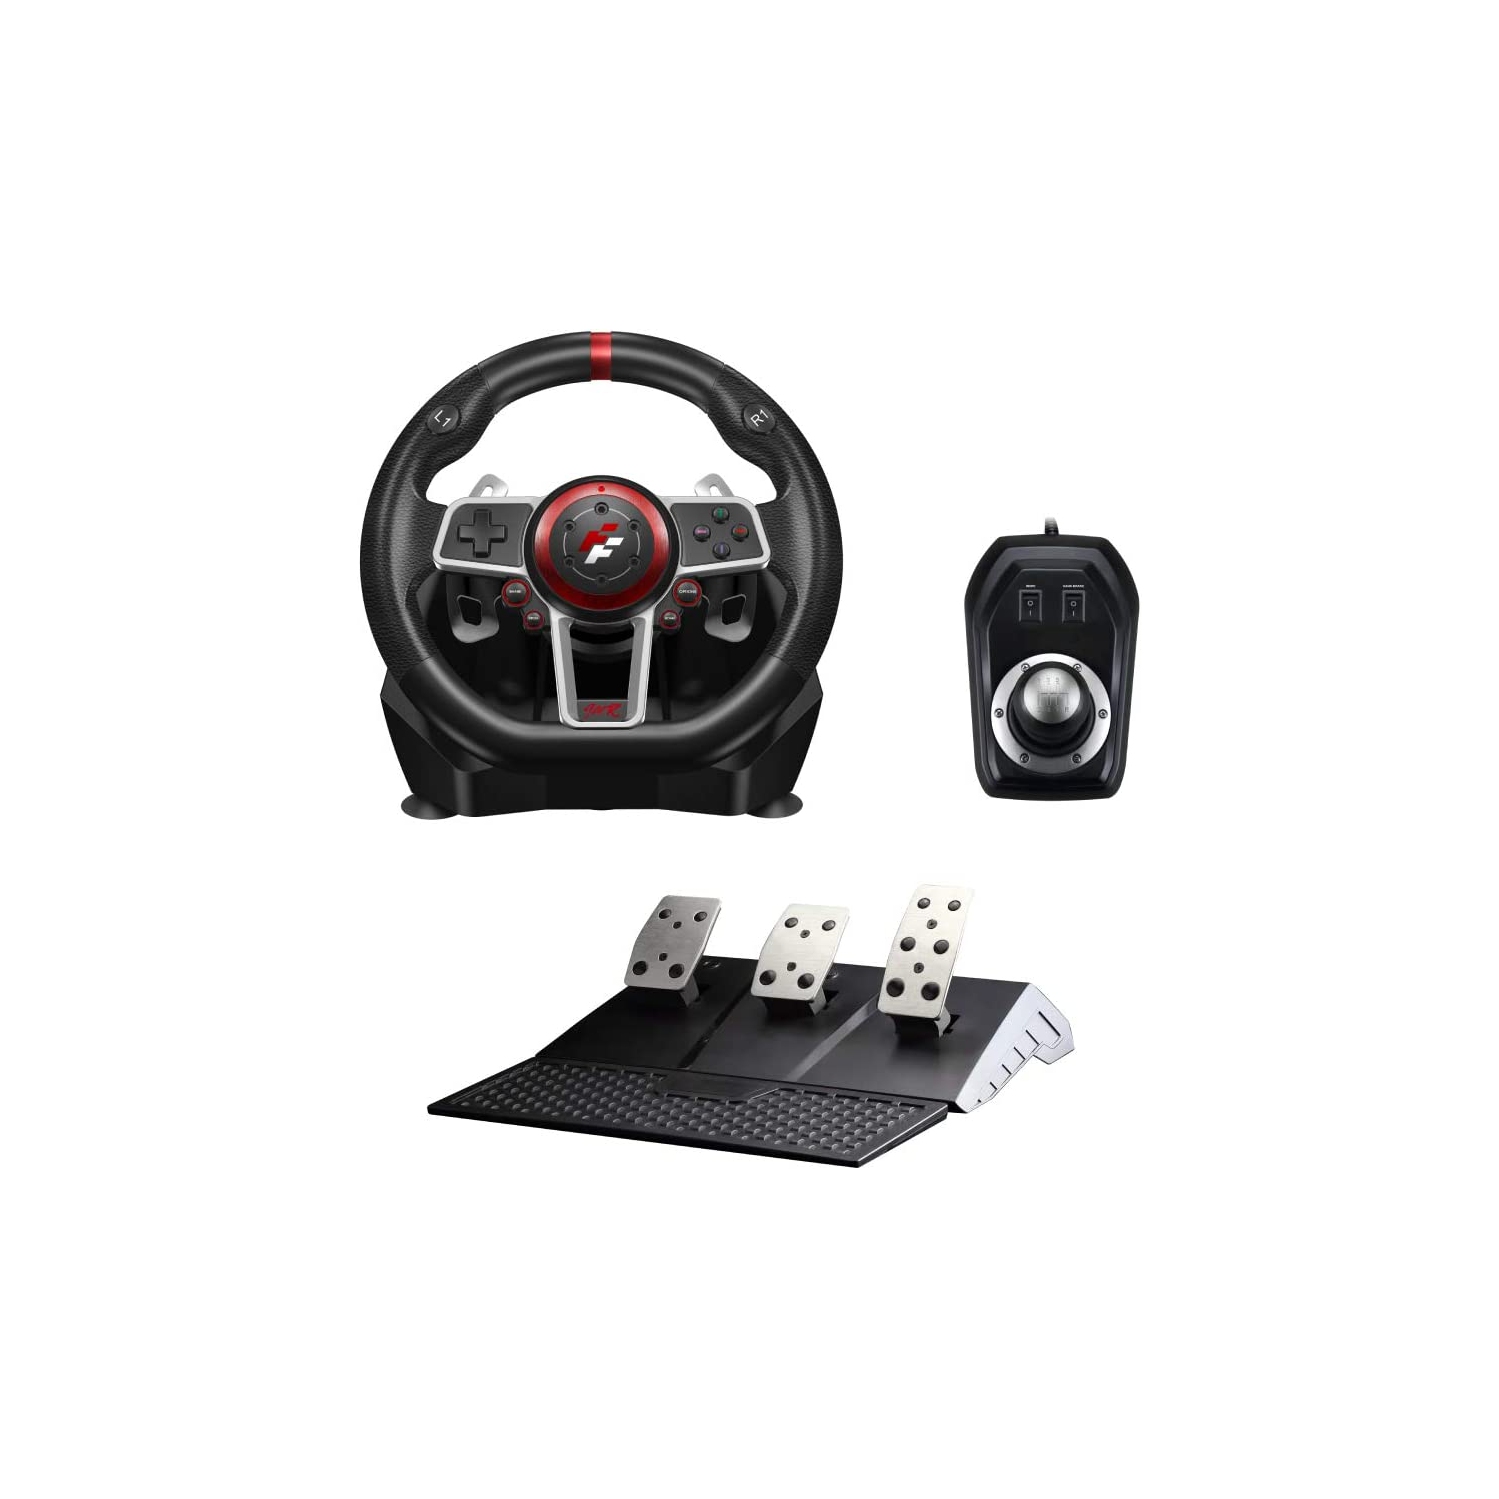 Refurbished (Excellent) - Flashfire Suzuka 900R racing wheel set with Clutch pedals and H-shifter for PC, PS3, PS4, Xbox 360, XBOX ONE and Nintendo Switch